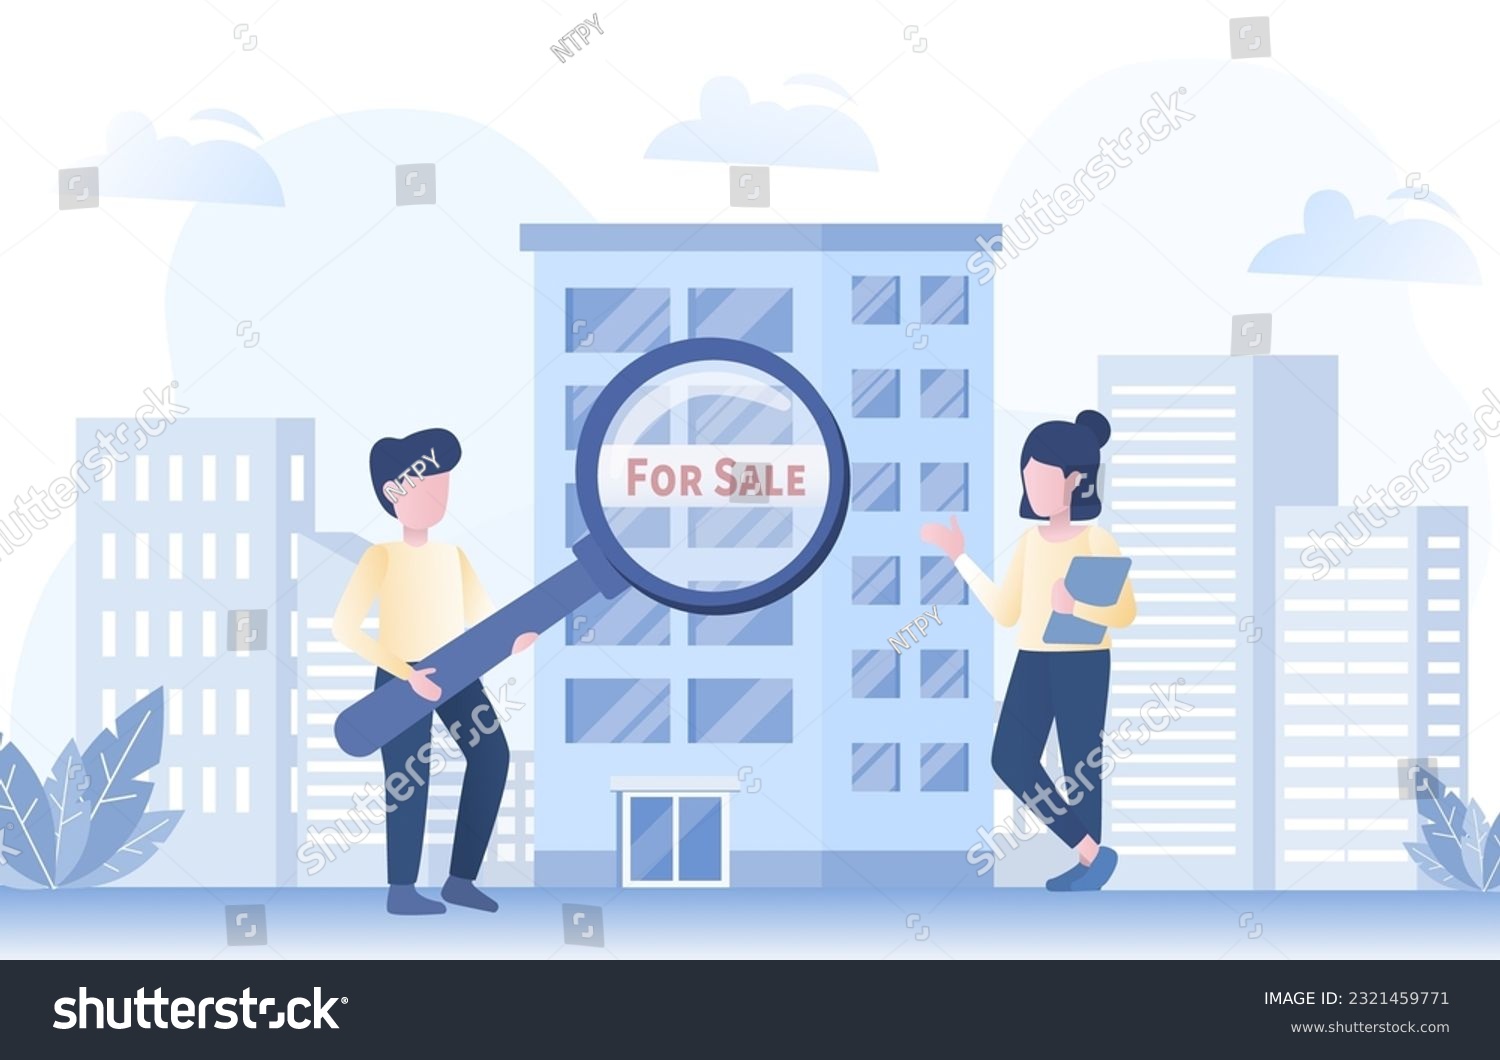 Mortgage or real estate rental concept. Searching for condominiums or apartments in the real estate market. Information, explore options and engage with agents or owners. Flat vector illustration. #2321459771